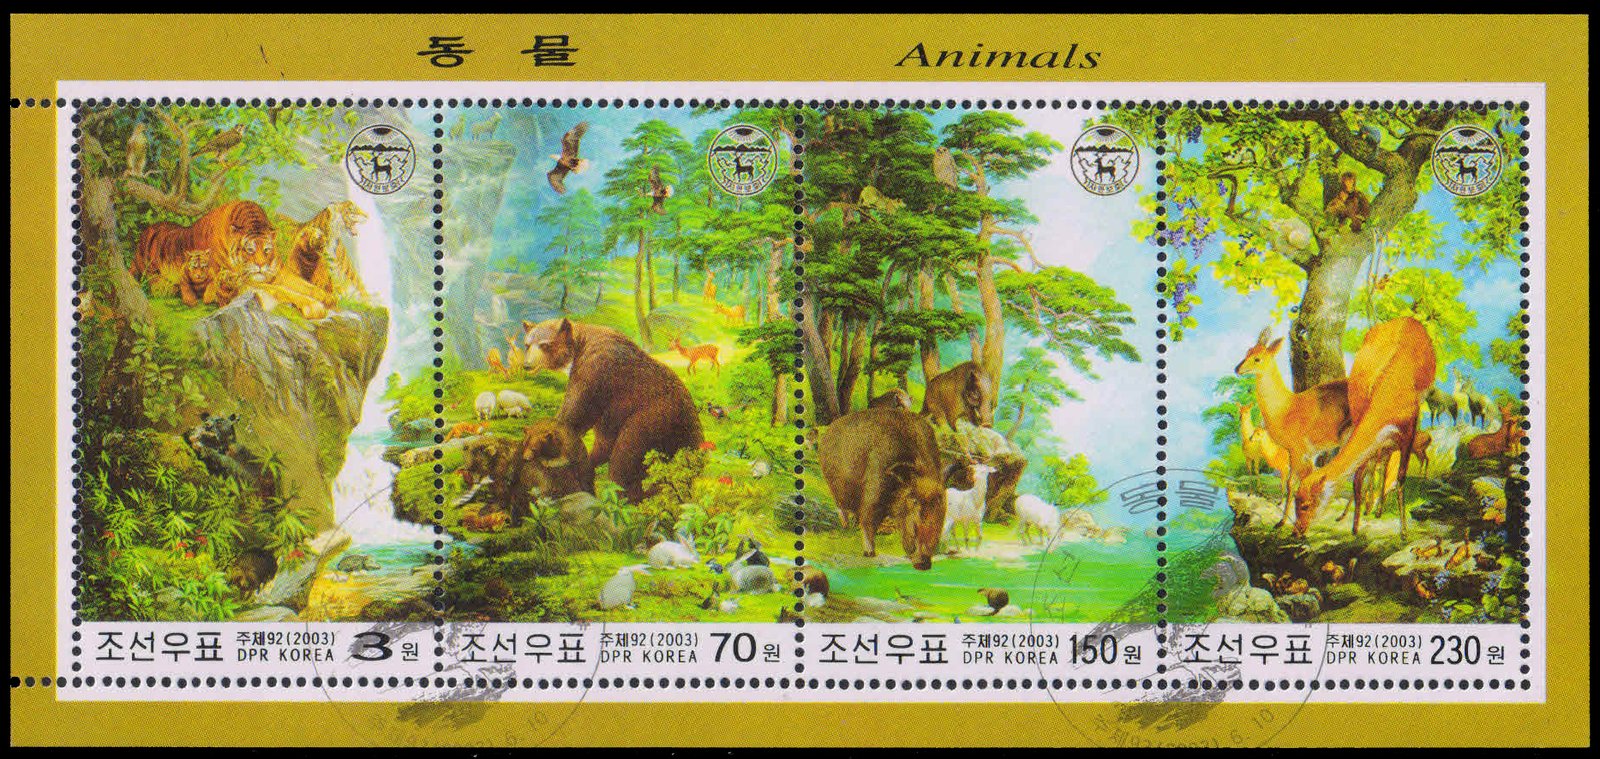 NORTH KOREA 2003-Animals, Tigers, Bears, Wild Boar, Deer, M/s of 4 Stamps, First Day Cancelled, MNH-S.G. MS N 4315-Cat � 11.50